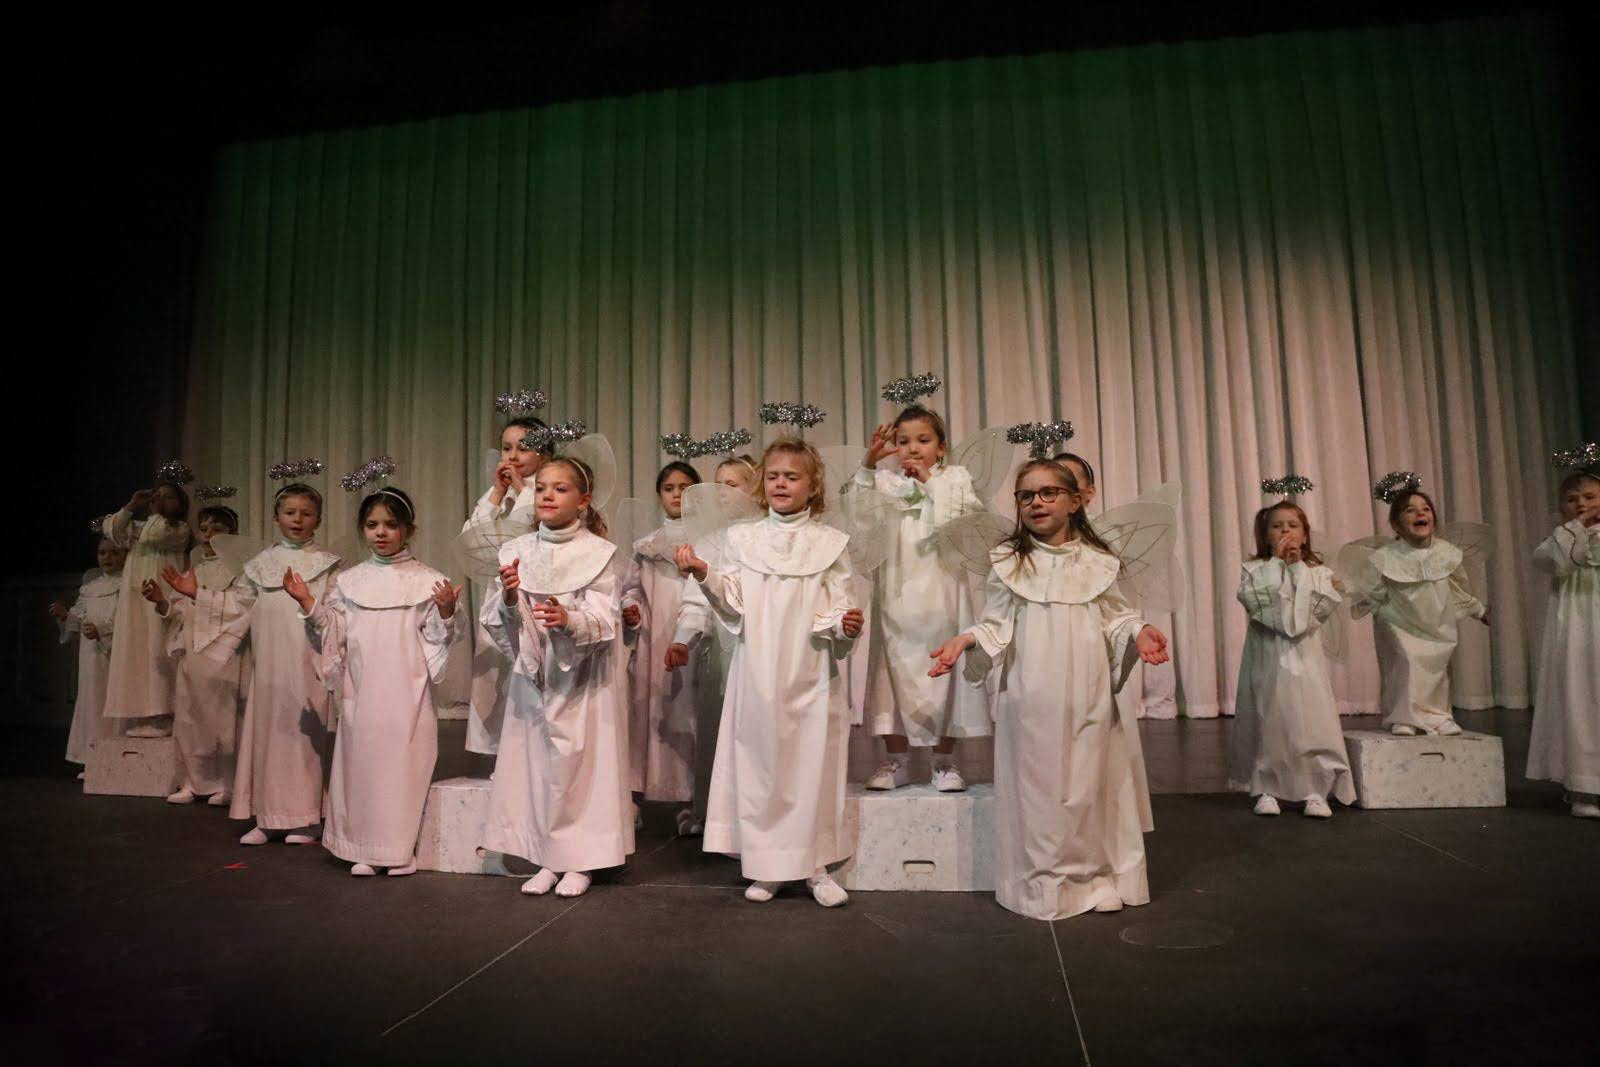 Young children dressed in angel robes with halos and wings strike a pose.